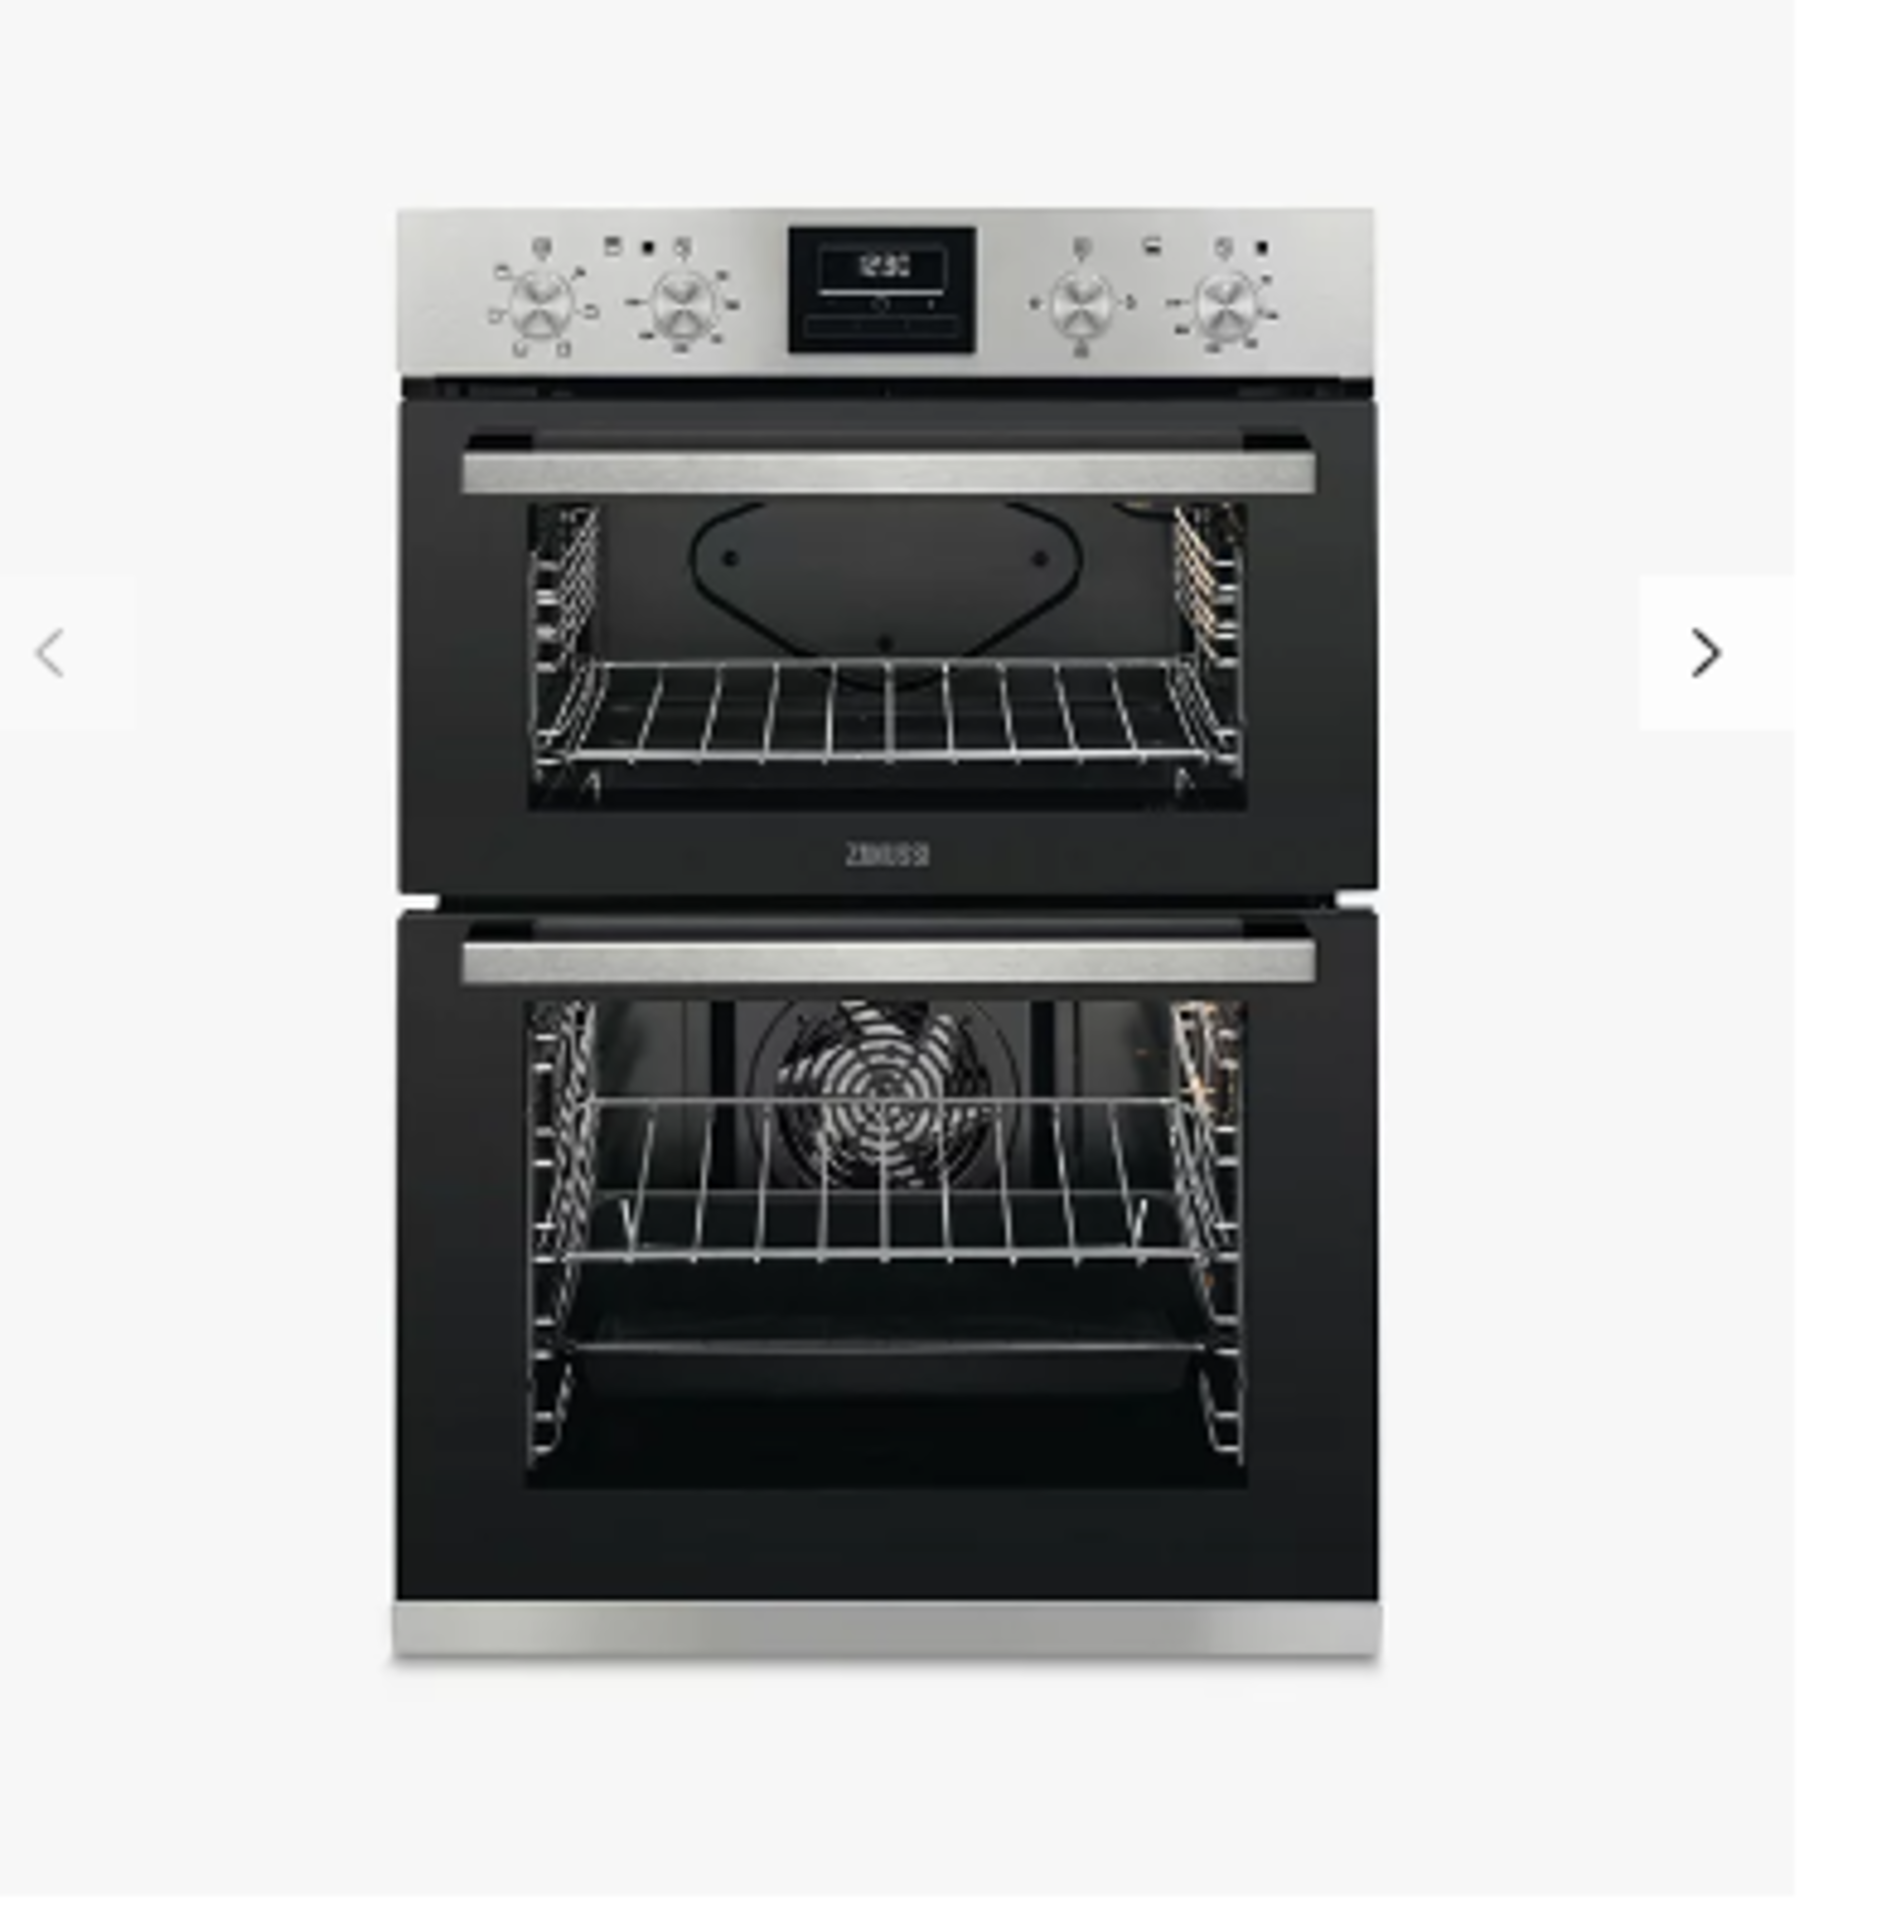 Zanussi ZOD35661XK Built-In Multifunction Electric Double Oven, Stainless Steel RRP £599